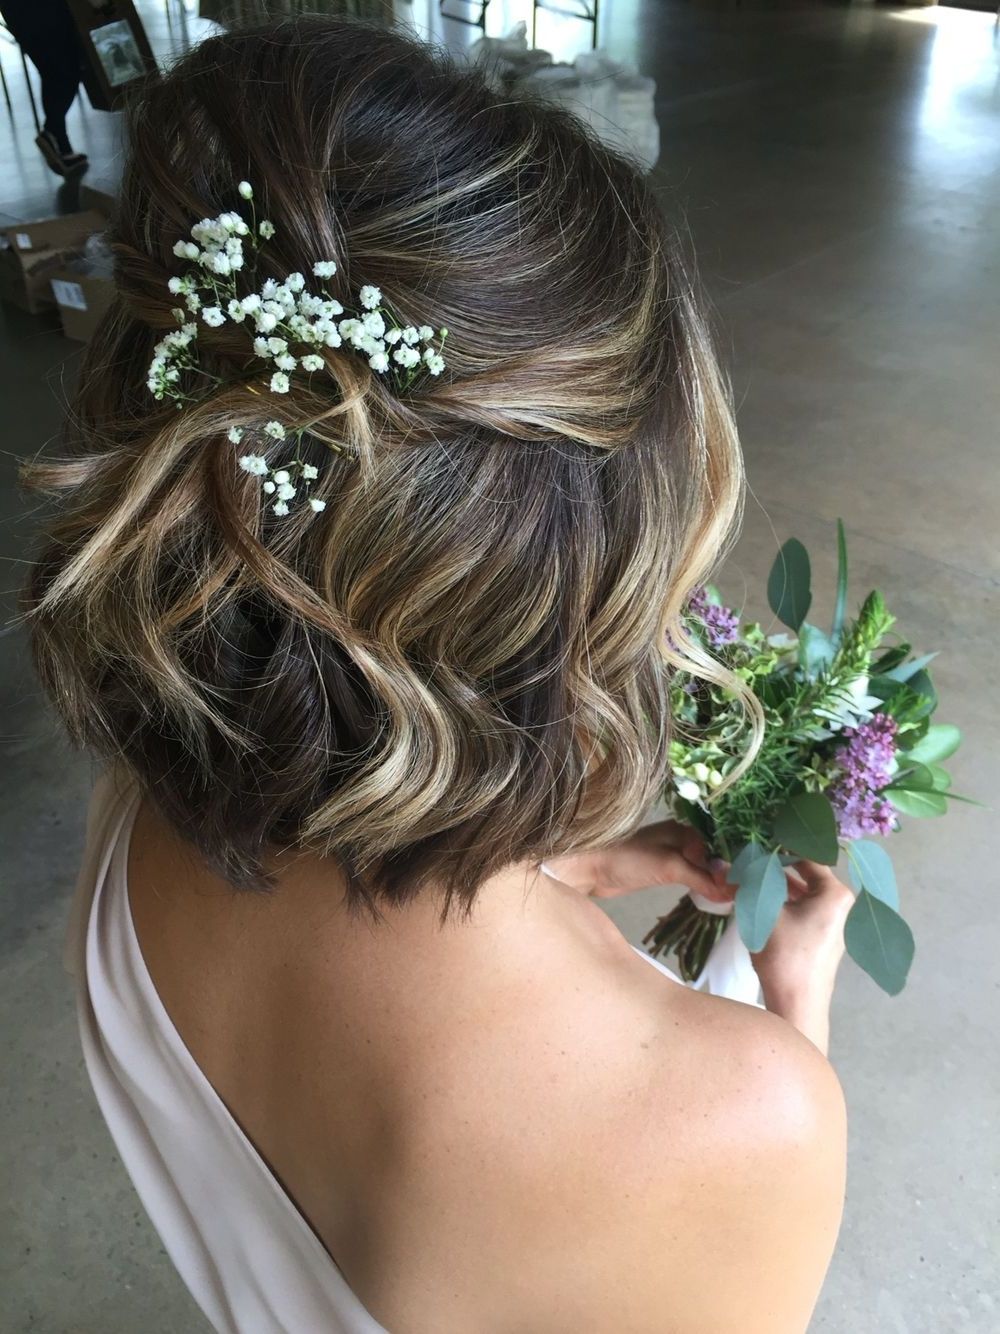 Short Hair Formal Stylejeanettegillin Http://eroticwadewisdom Intended For Well Liked Cute Wedding Guest Hairstyles For Short Hair (View 14 of 15)